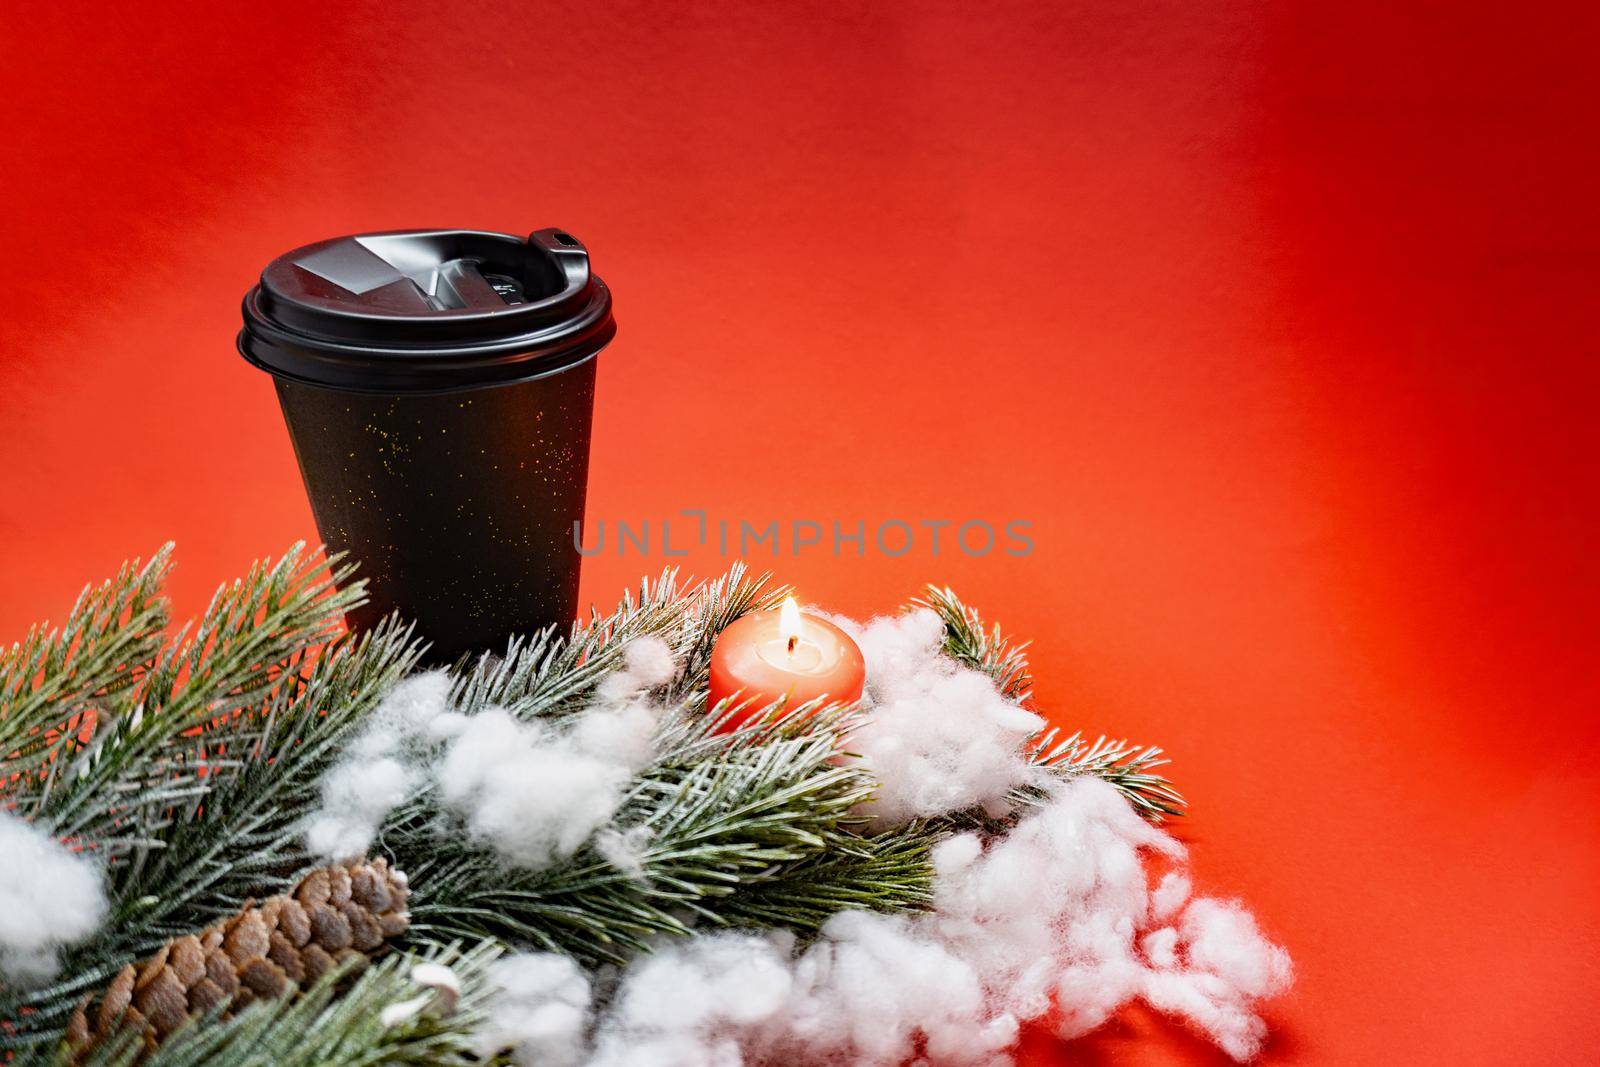 Black coffee cup with plastic cap, green braches with knar and snow and a red candle on red background with lights, new year concept, place for the text.